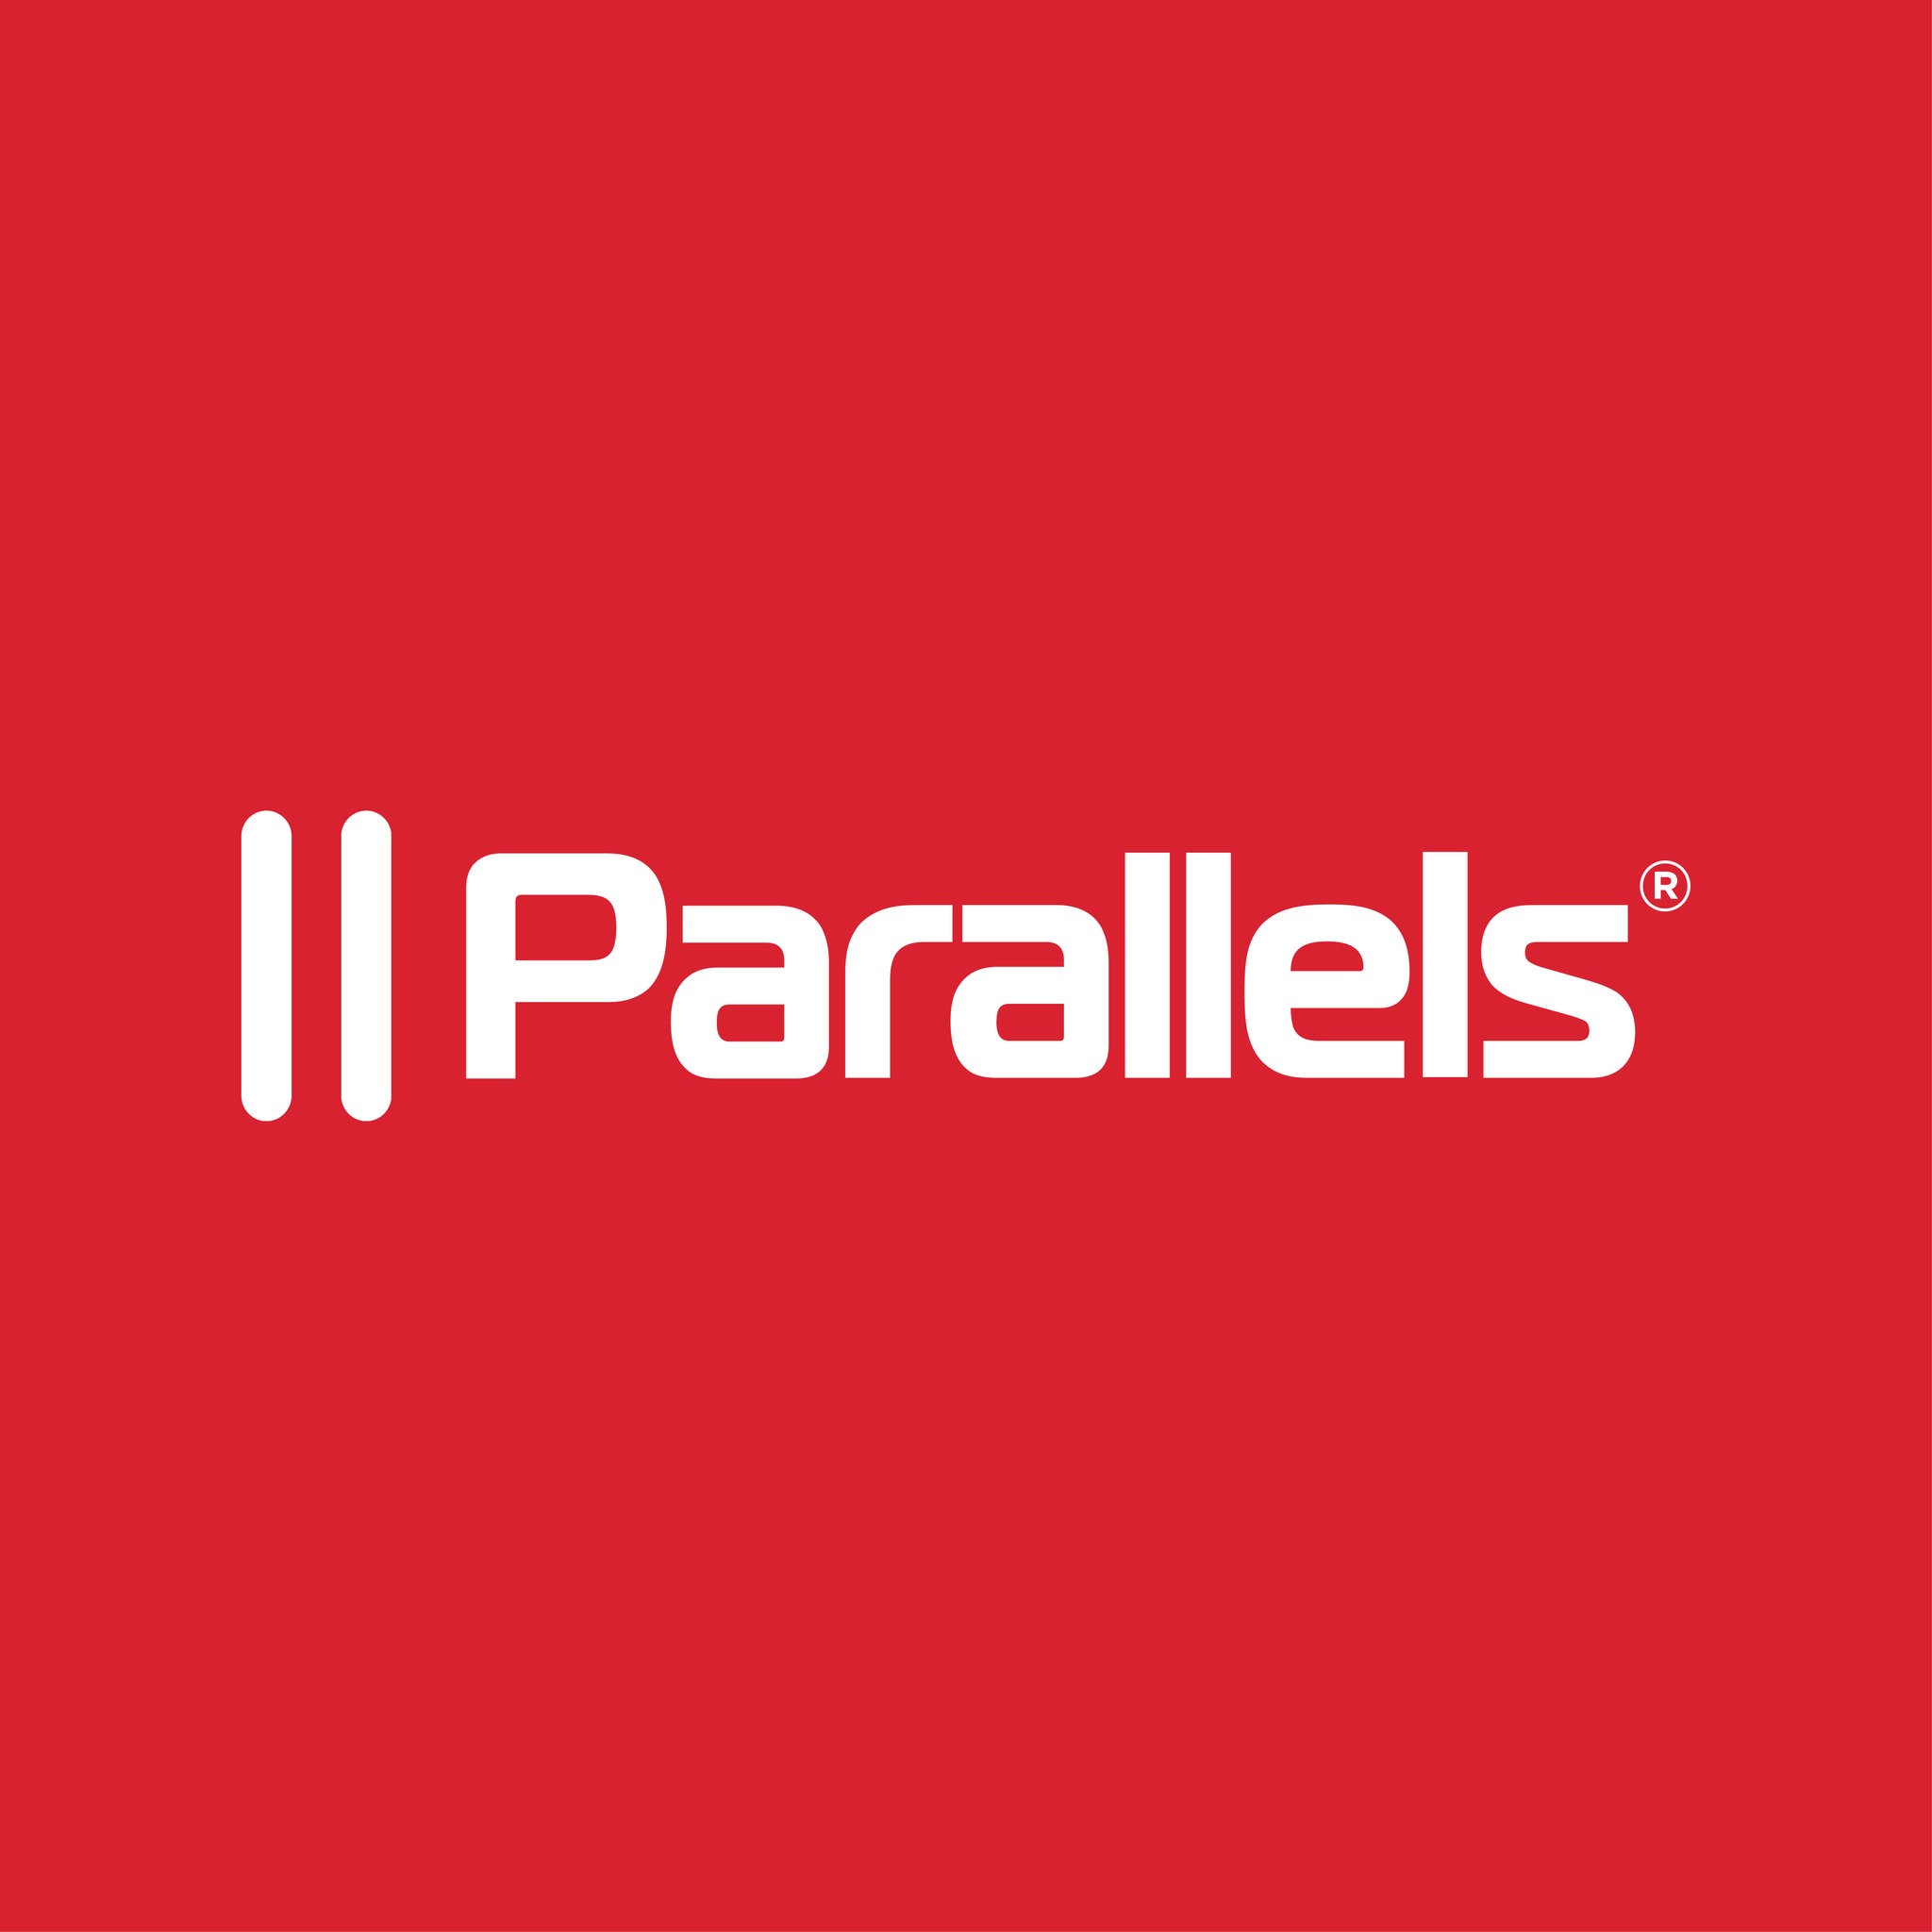 Parallels logo in red